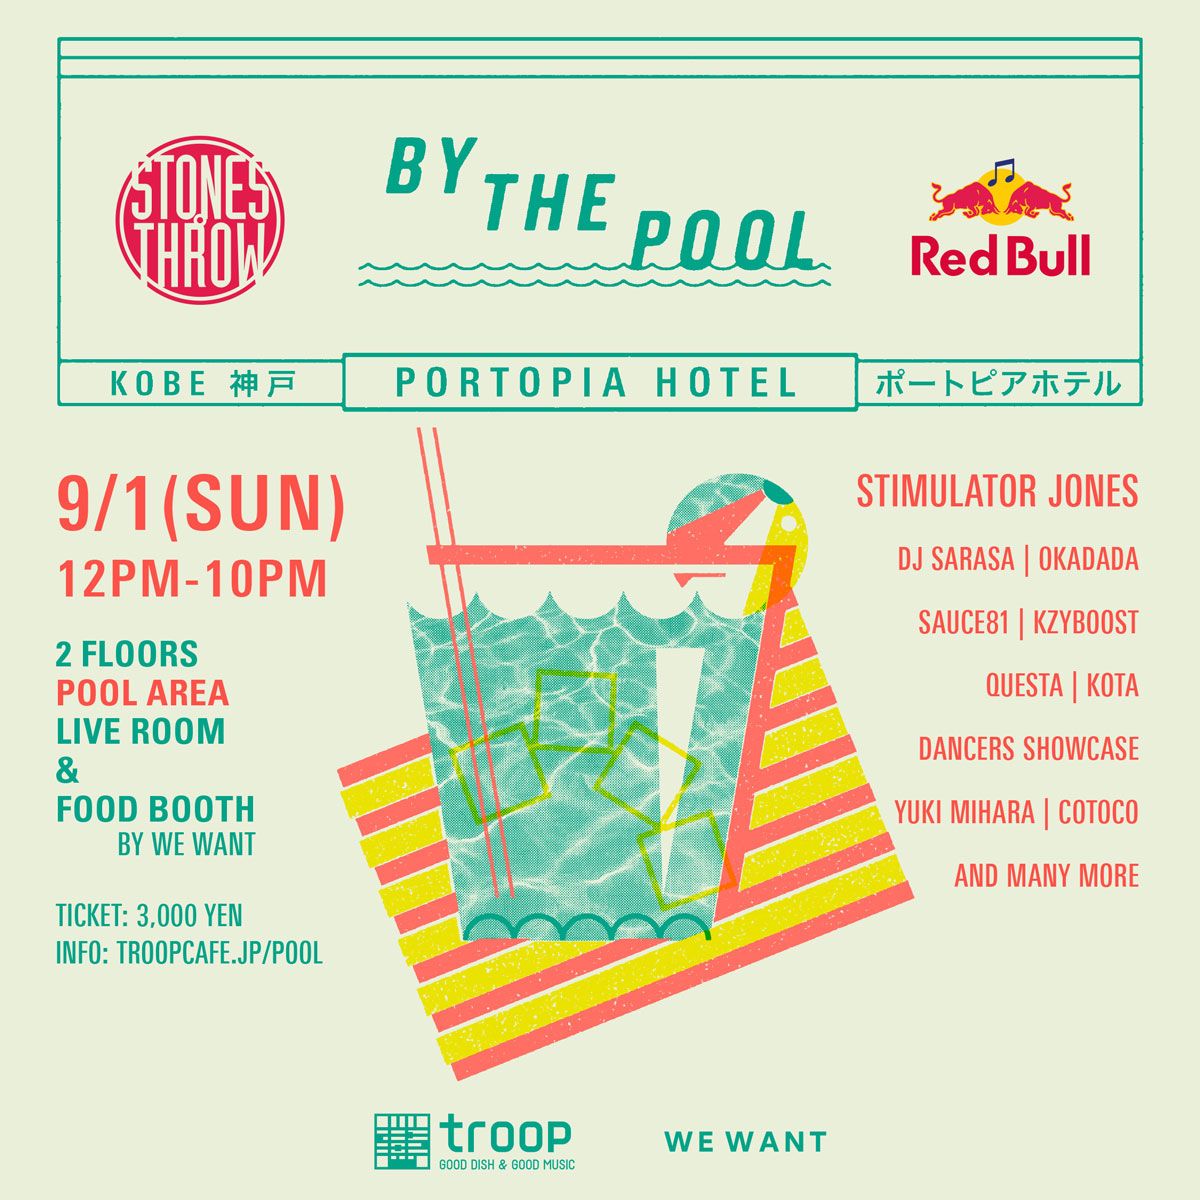 By The Pool  presented by Stones Throw & Red Bull